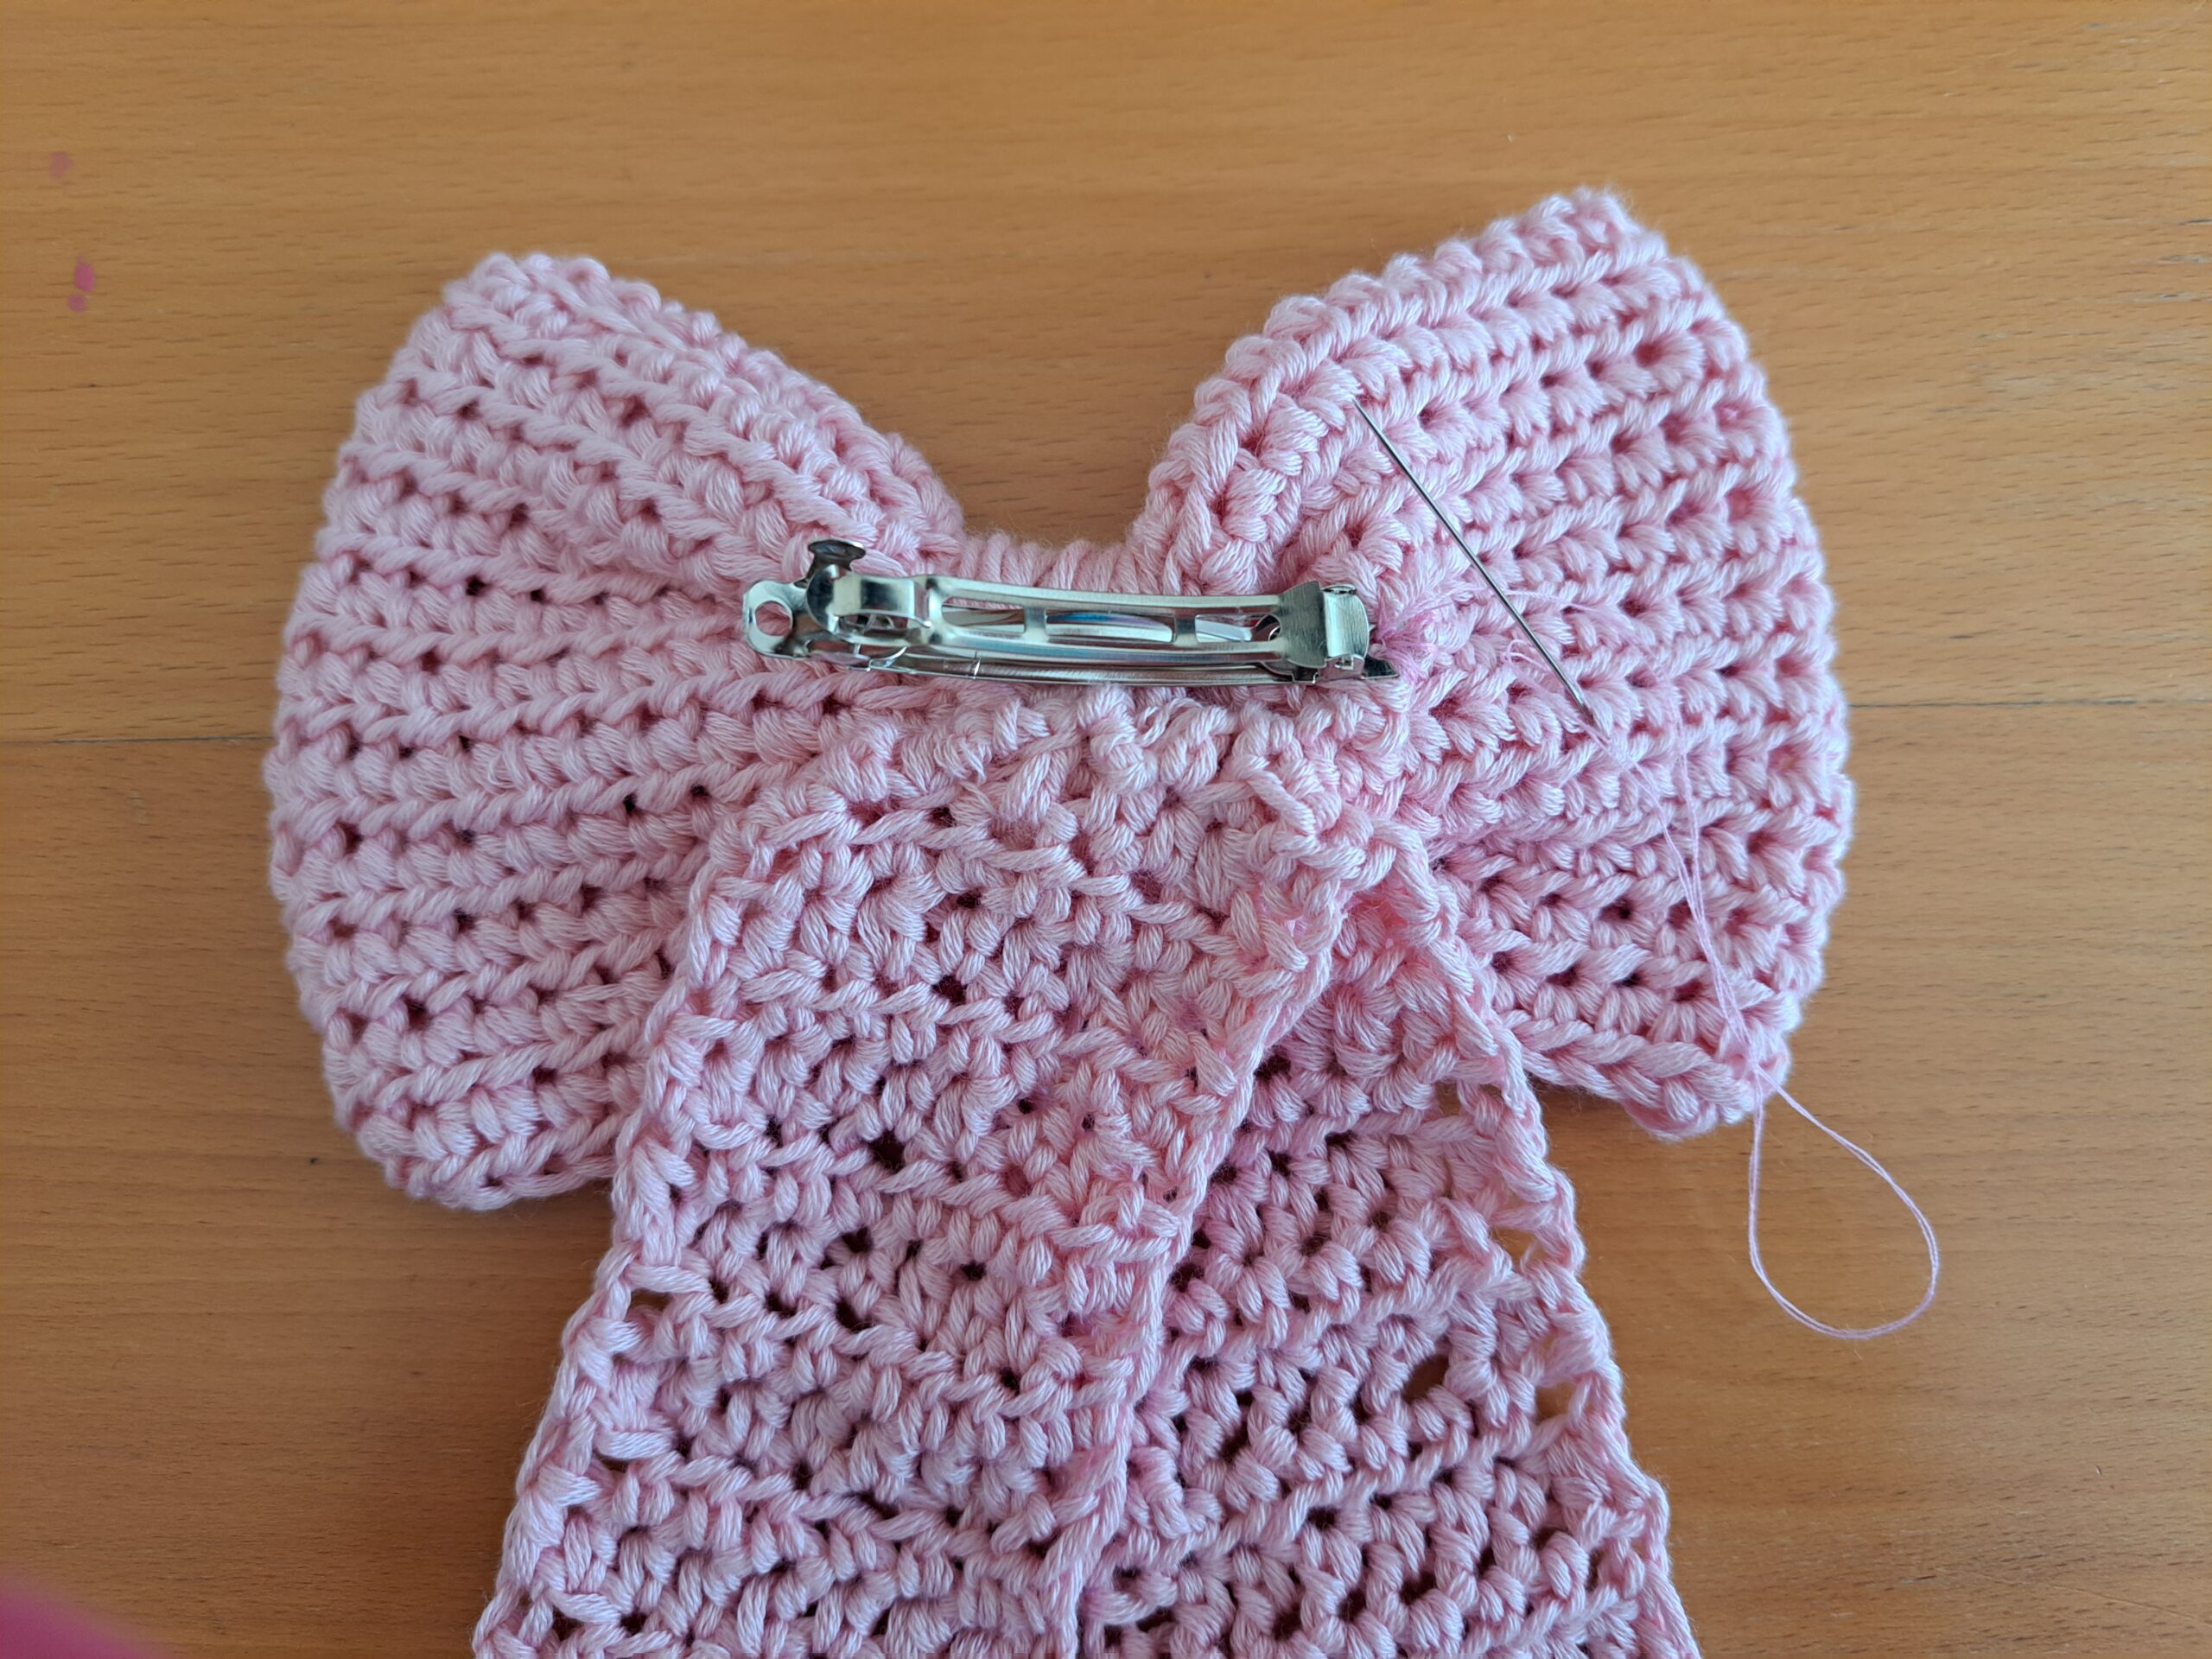 Sew the hair slide onto the back of the bow